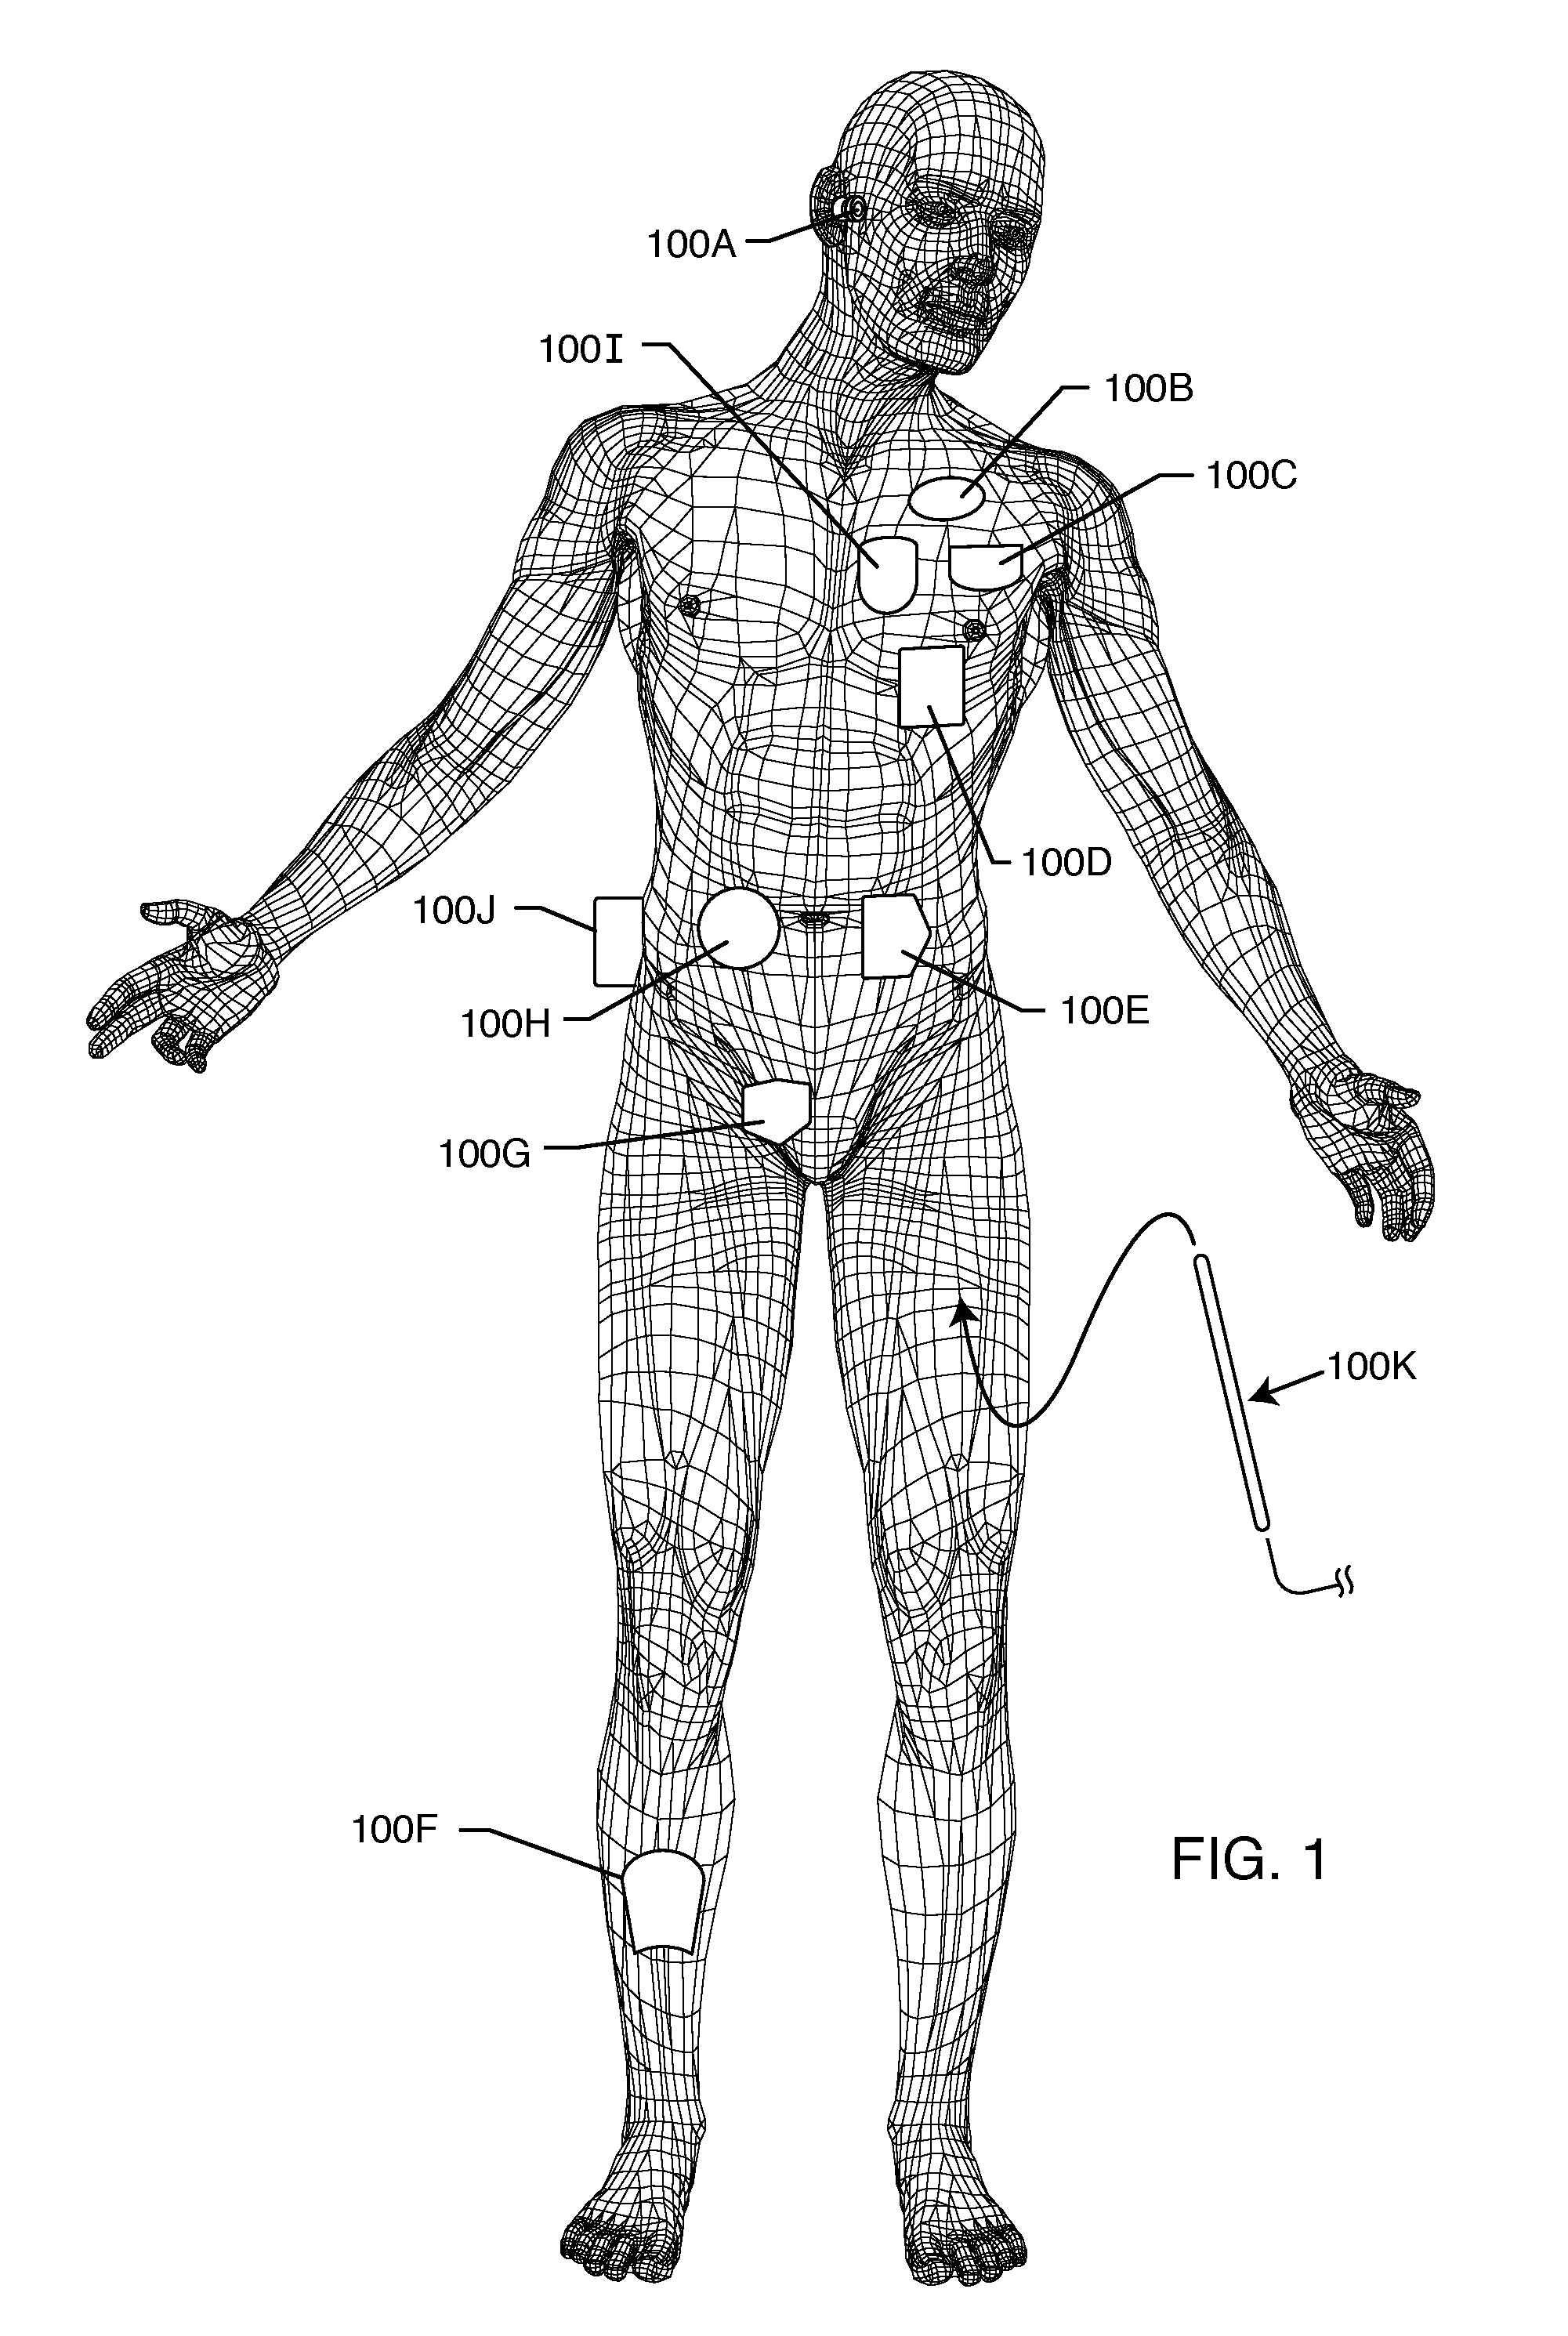 Self-resonant inductor wound portion of an implantable lead for enhanced MRI compatibility of active implantable medical devices